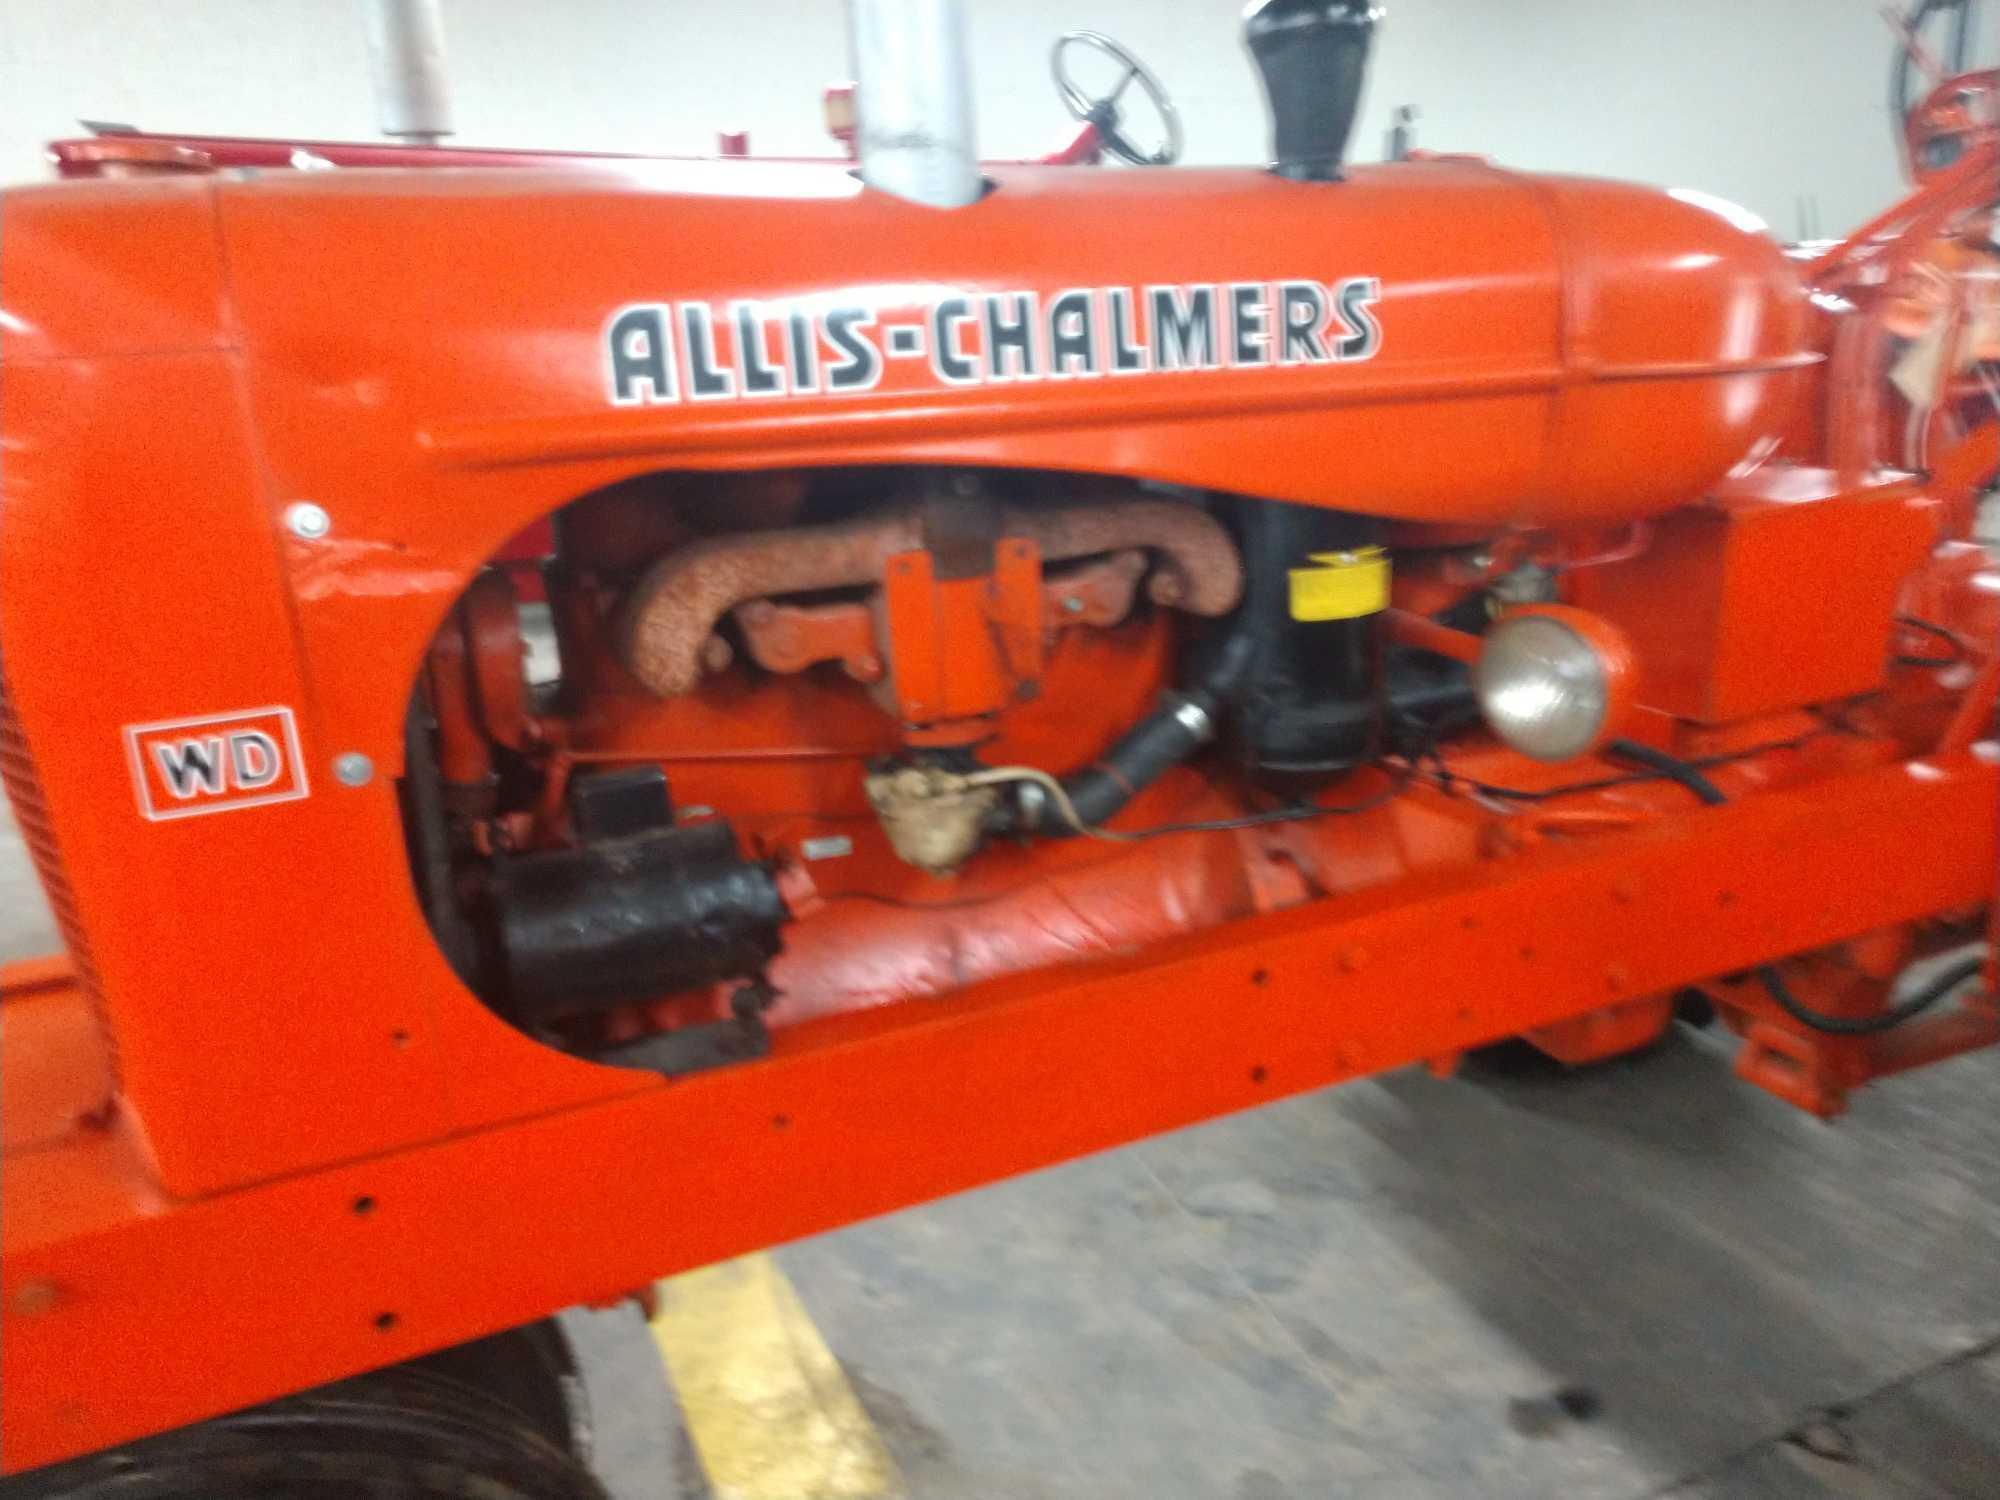 1950 Allis Chalmers WD Narrow Front